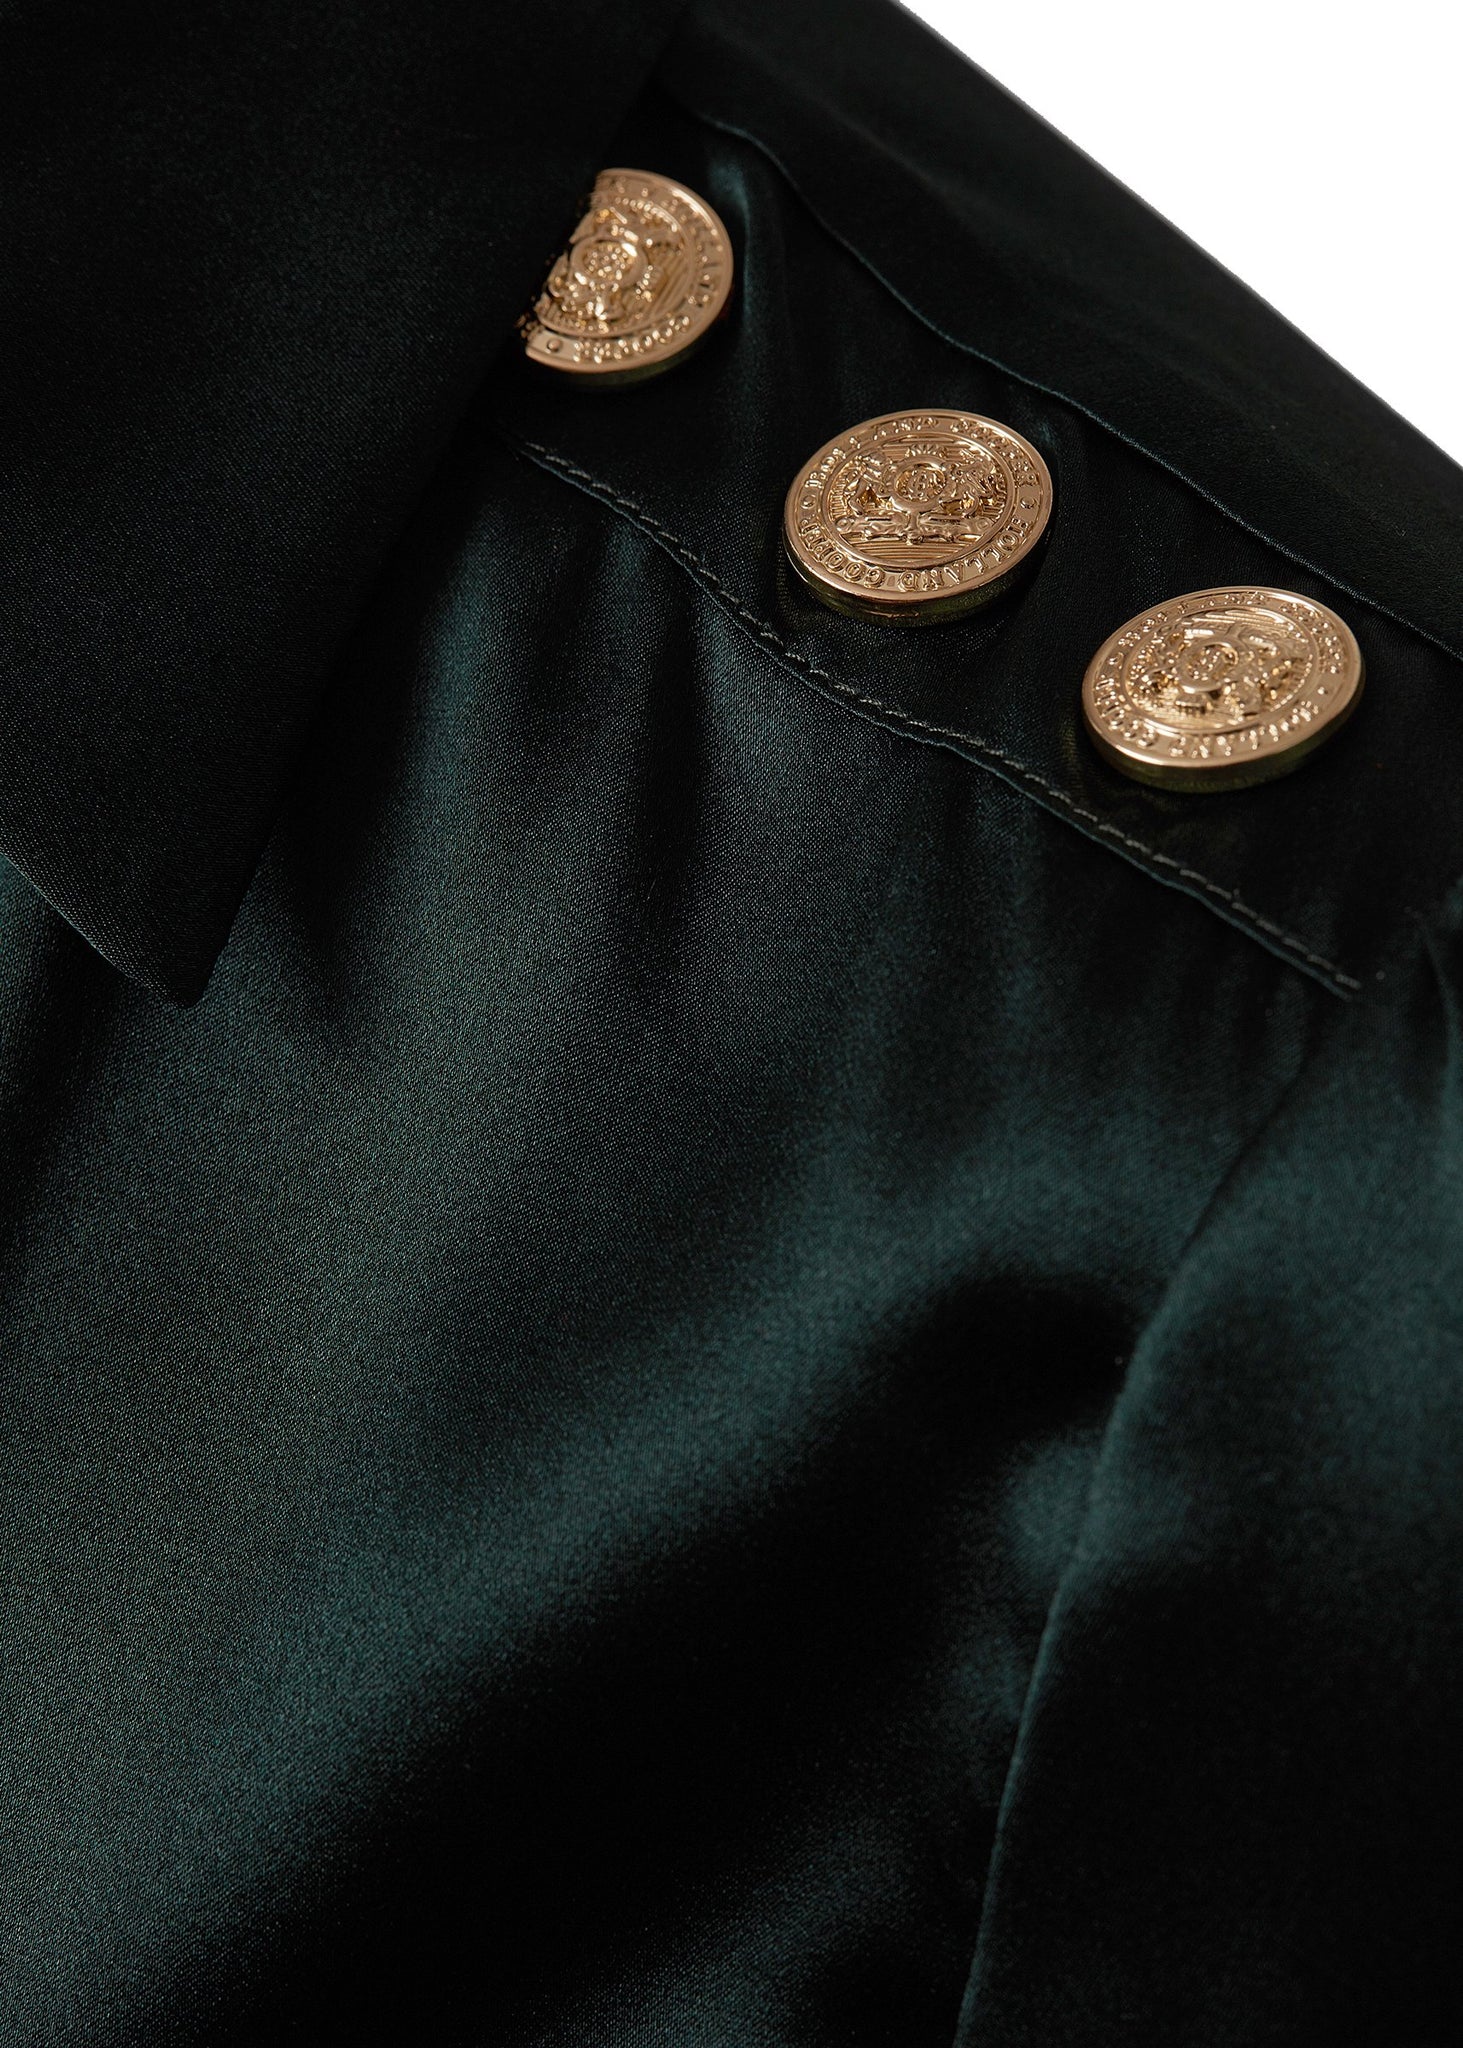 gold button shoulder detail on womens long sleeve dark green silk v neck blouse with gold buttons